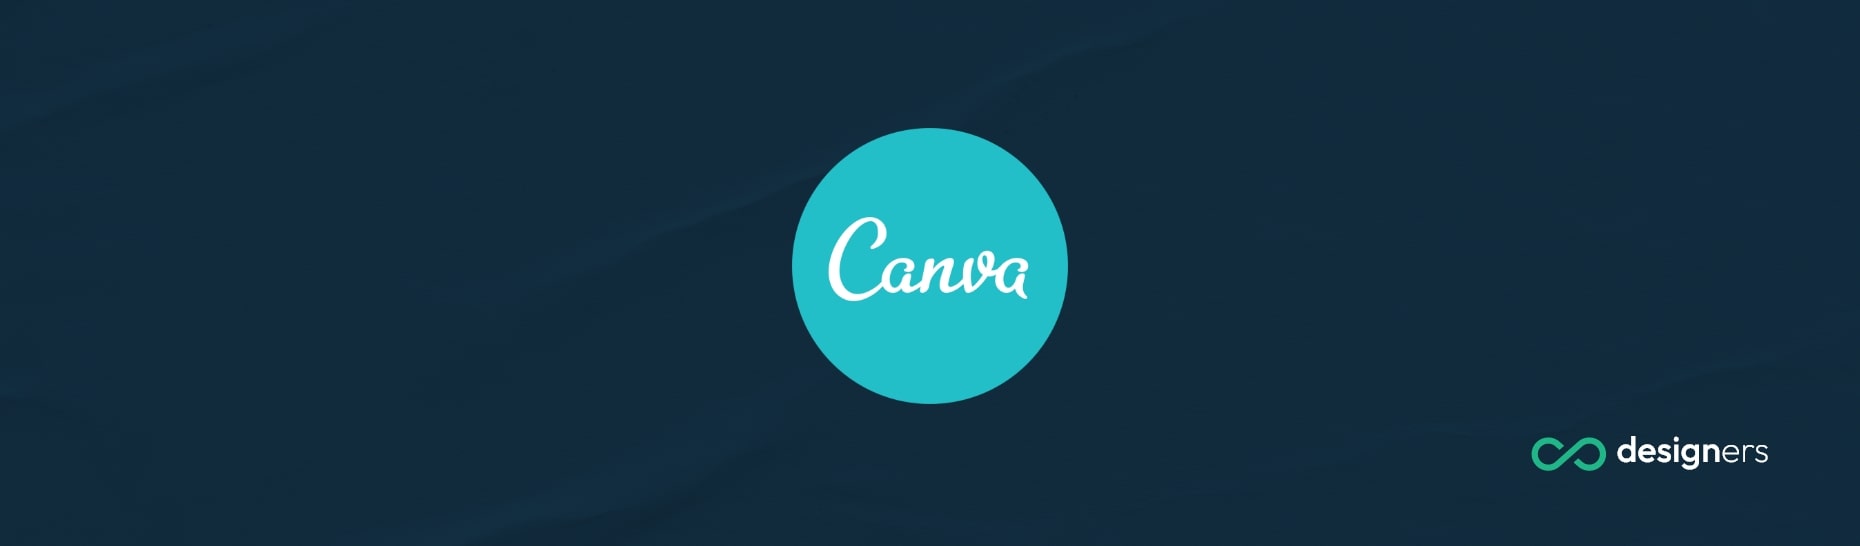 Does Canva Have a Mobile App?